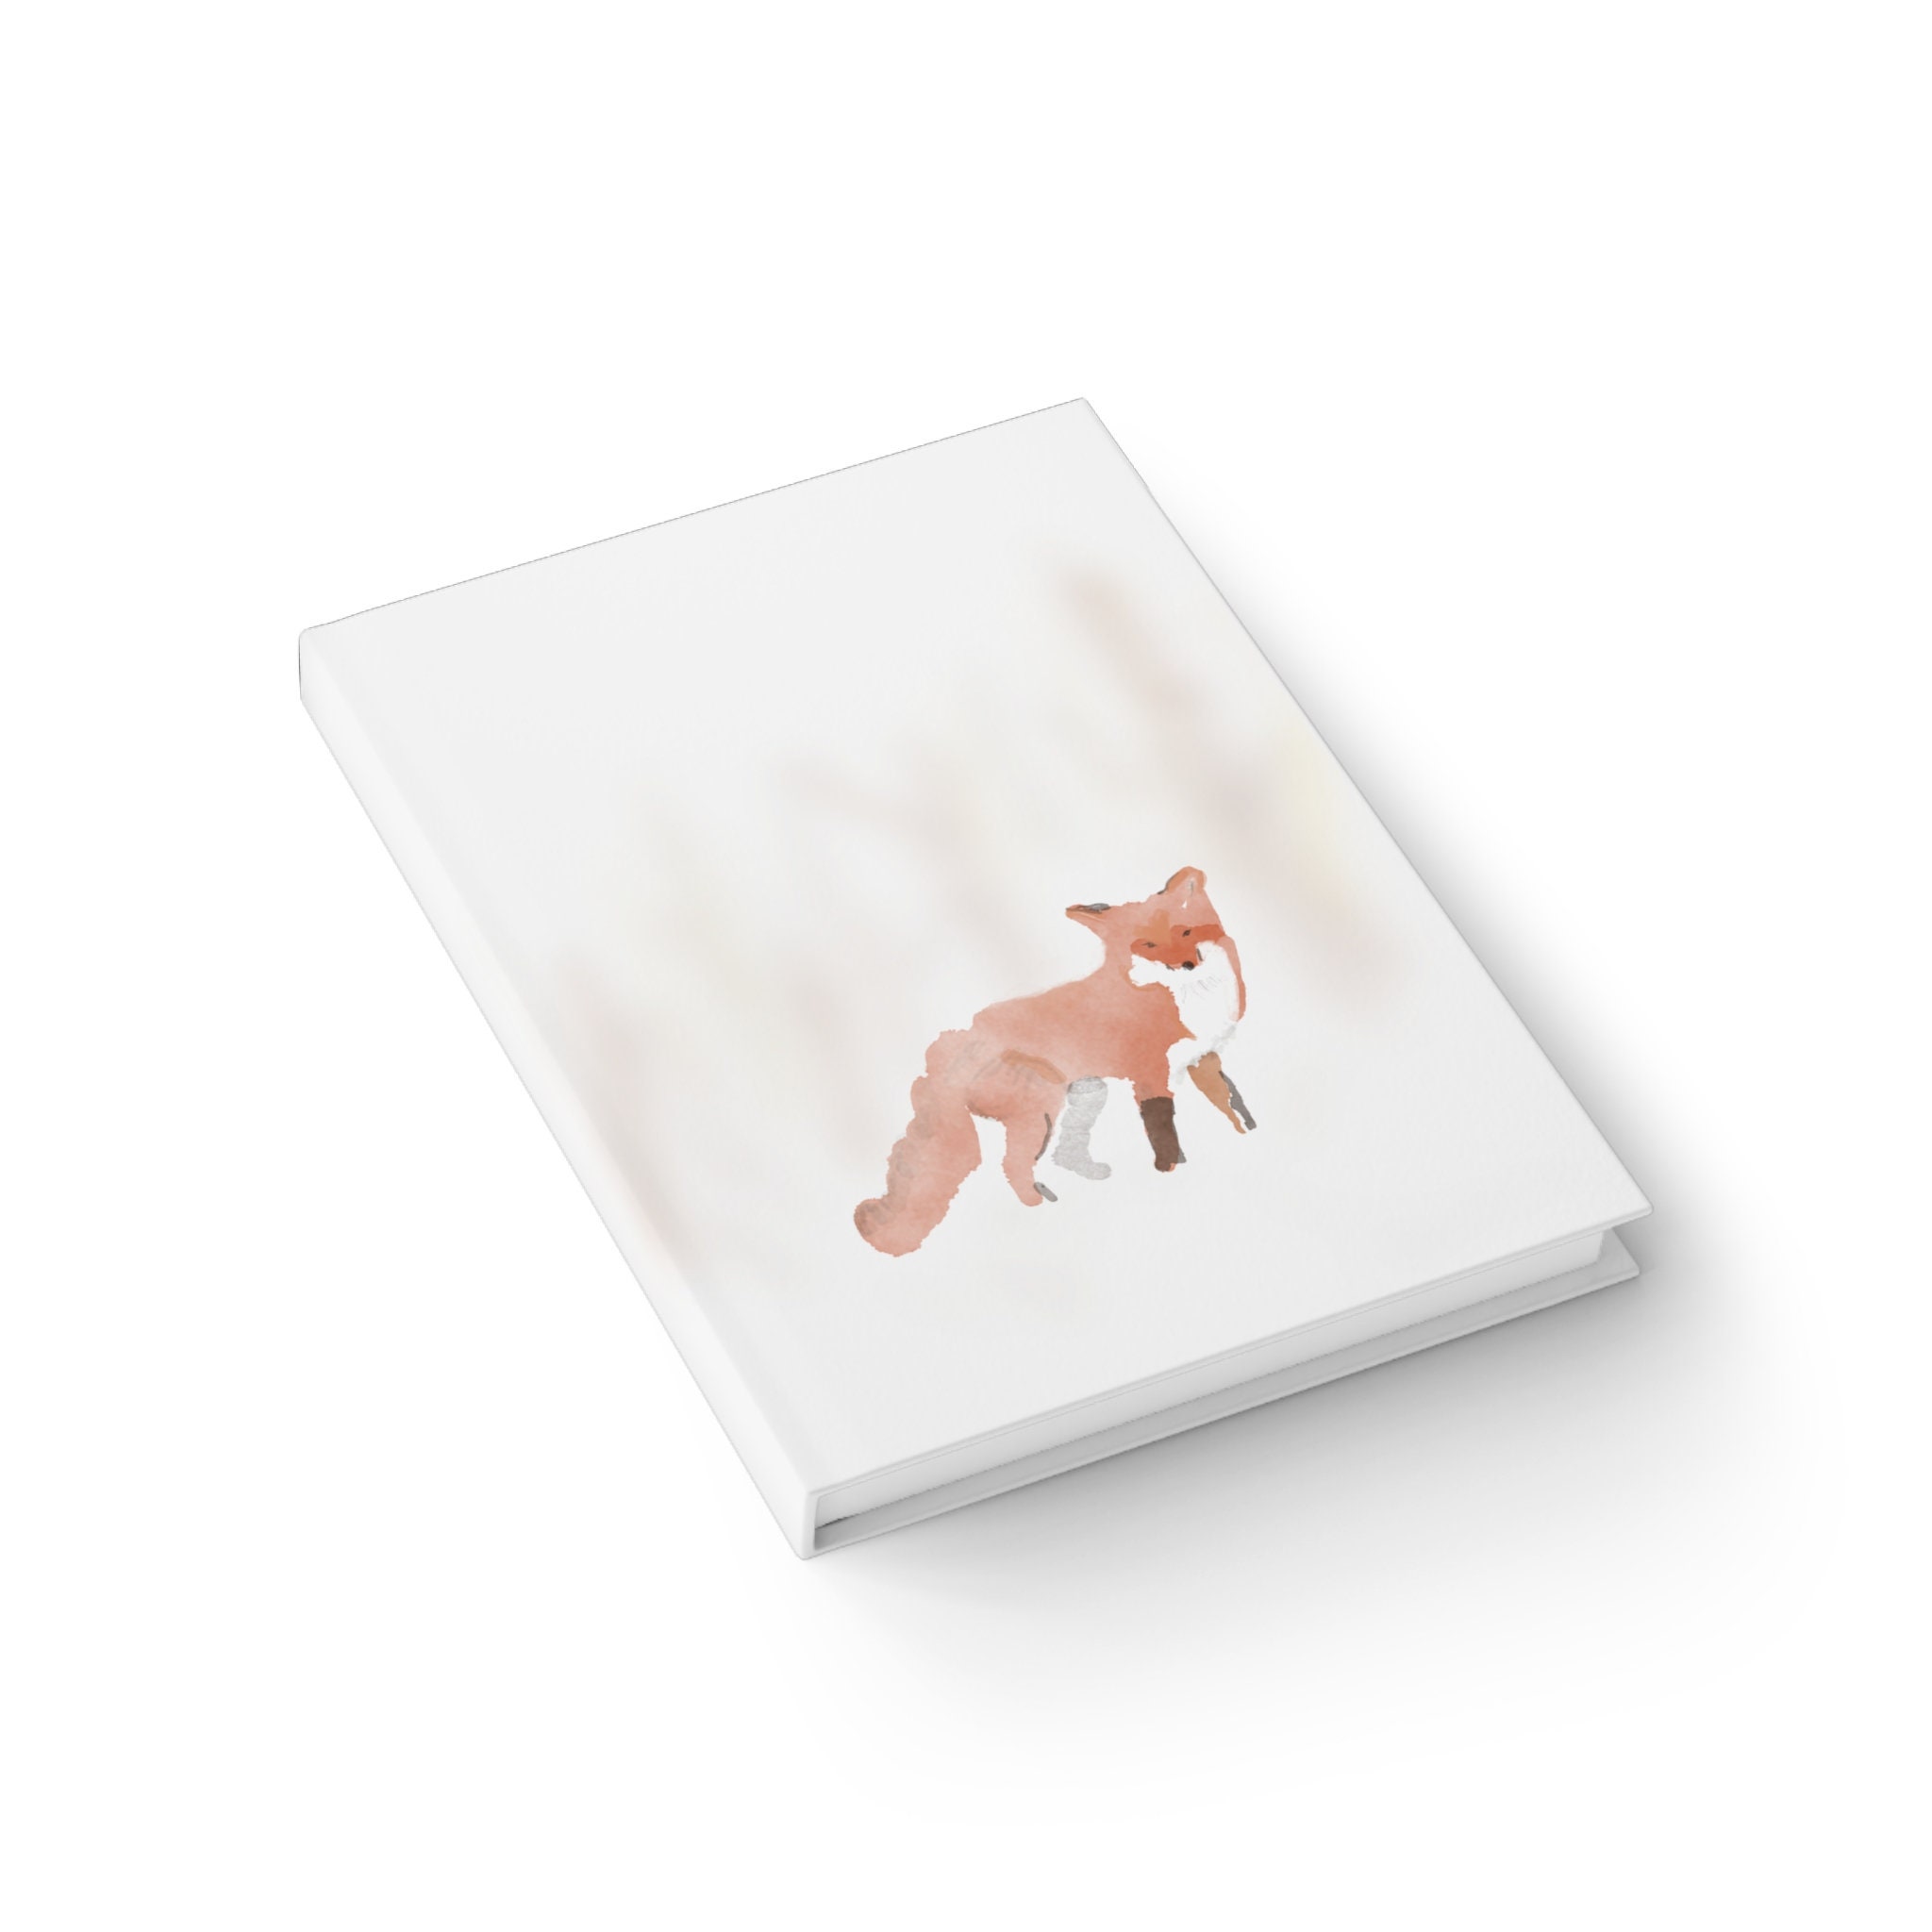 Hard Cover Journal Anime Notebook Ruled Animal Journal, Fox Guide Notebook  